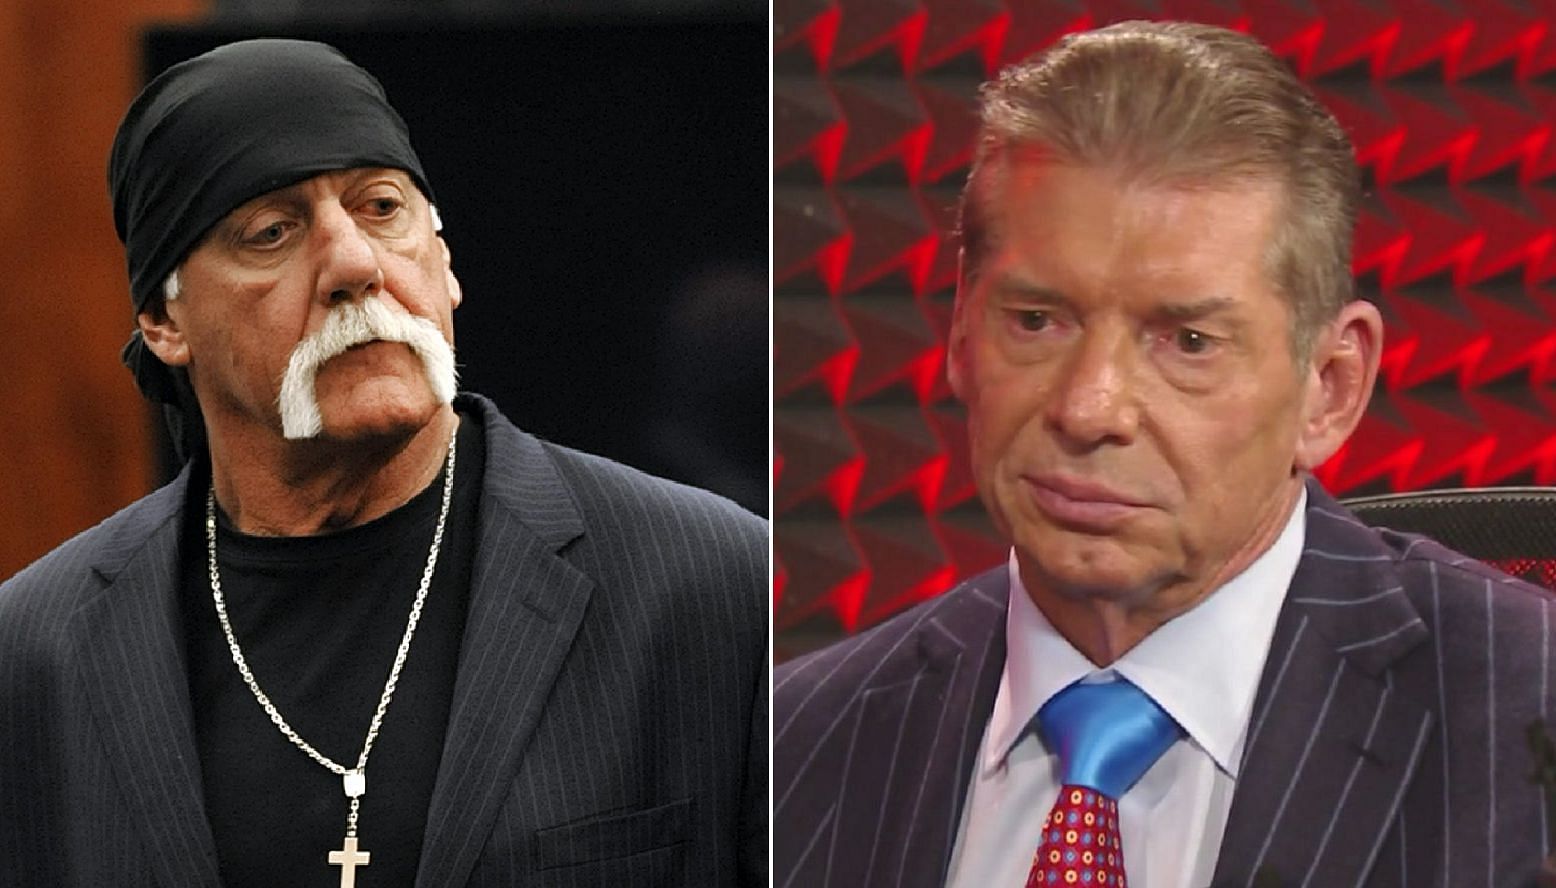 Hulk Hogan and Vince McMahon: Two of the biggest names in pro-wrestling